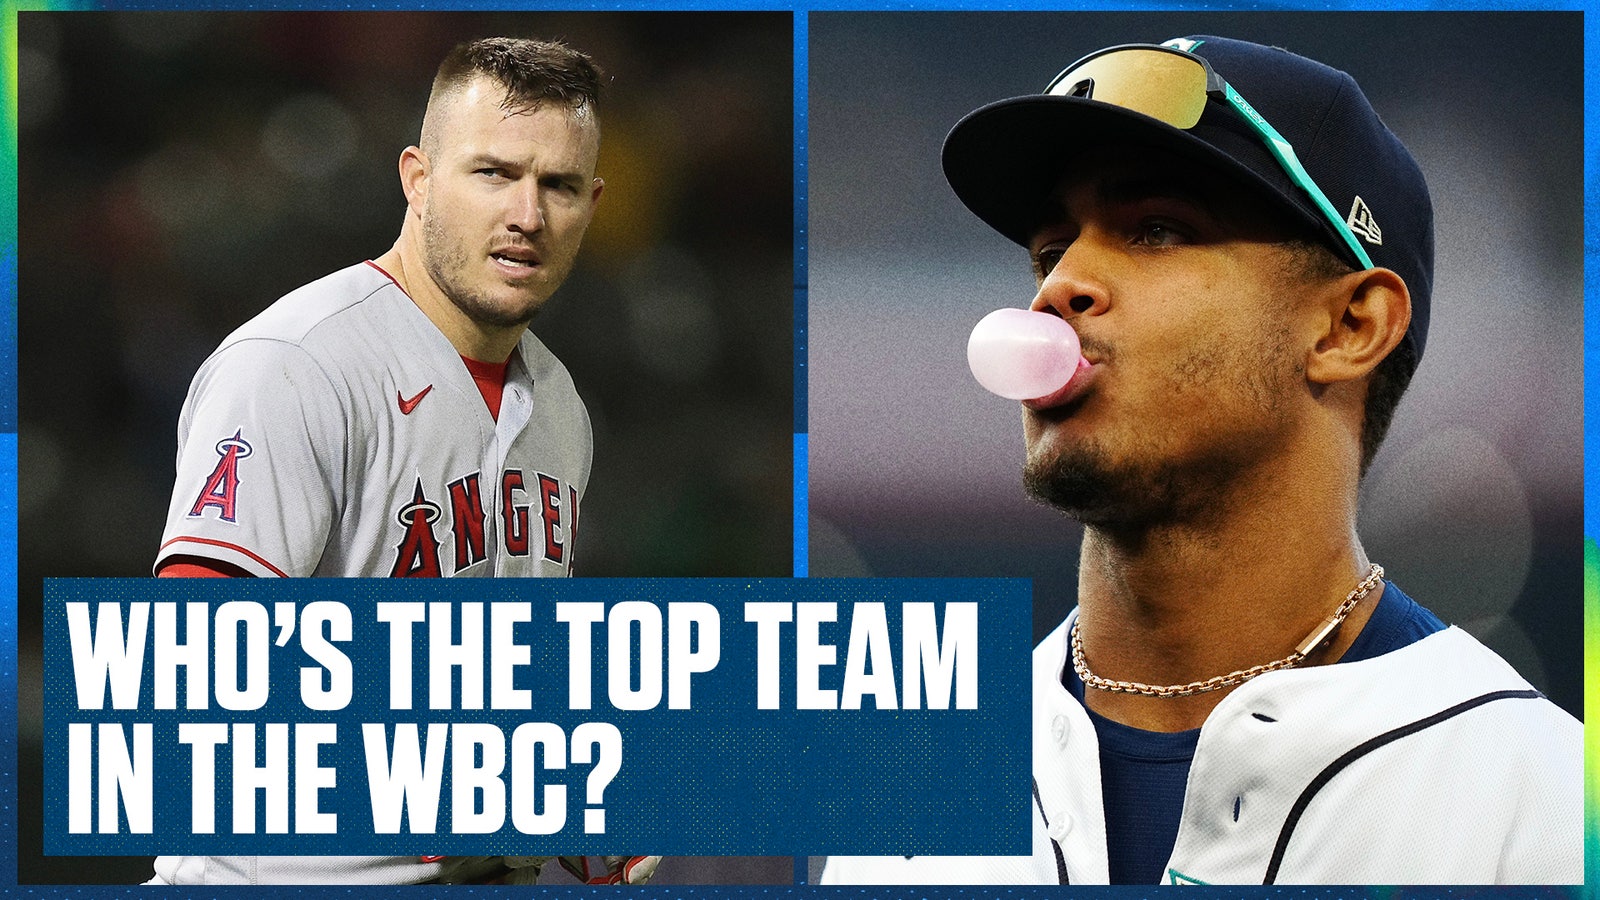 Trout & USA or Rodriguez & Dominican Republic for WBC's top team?